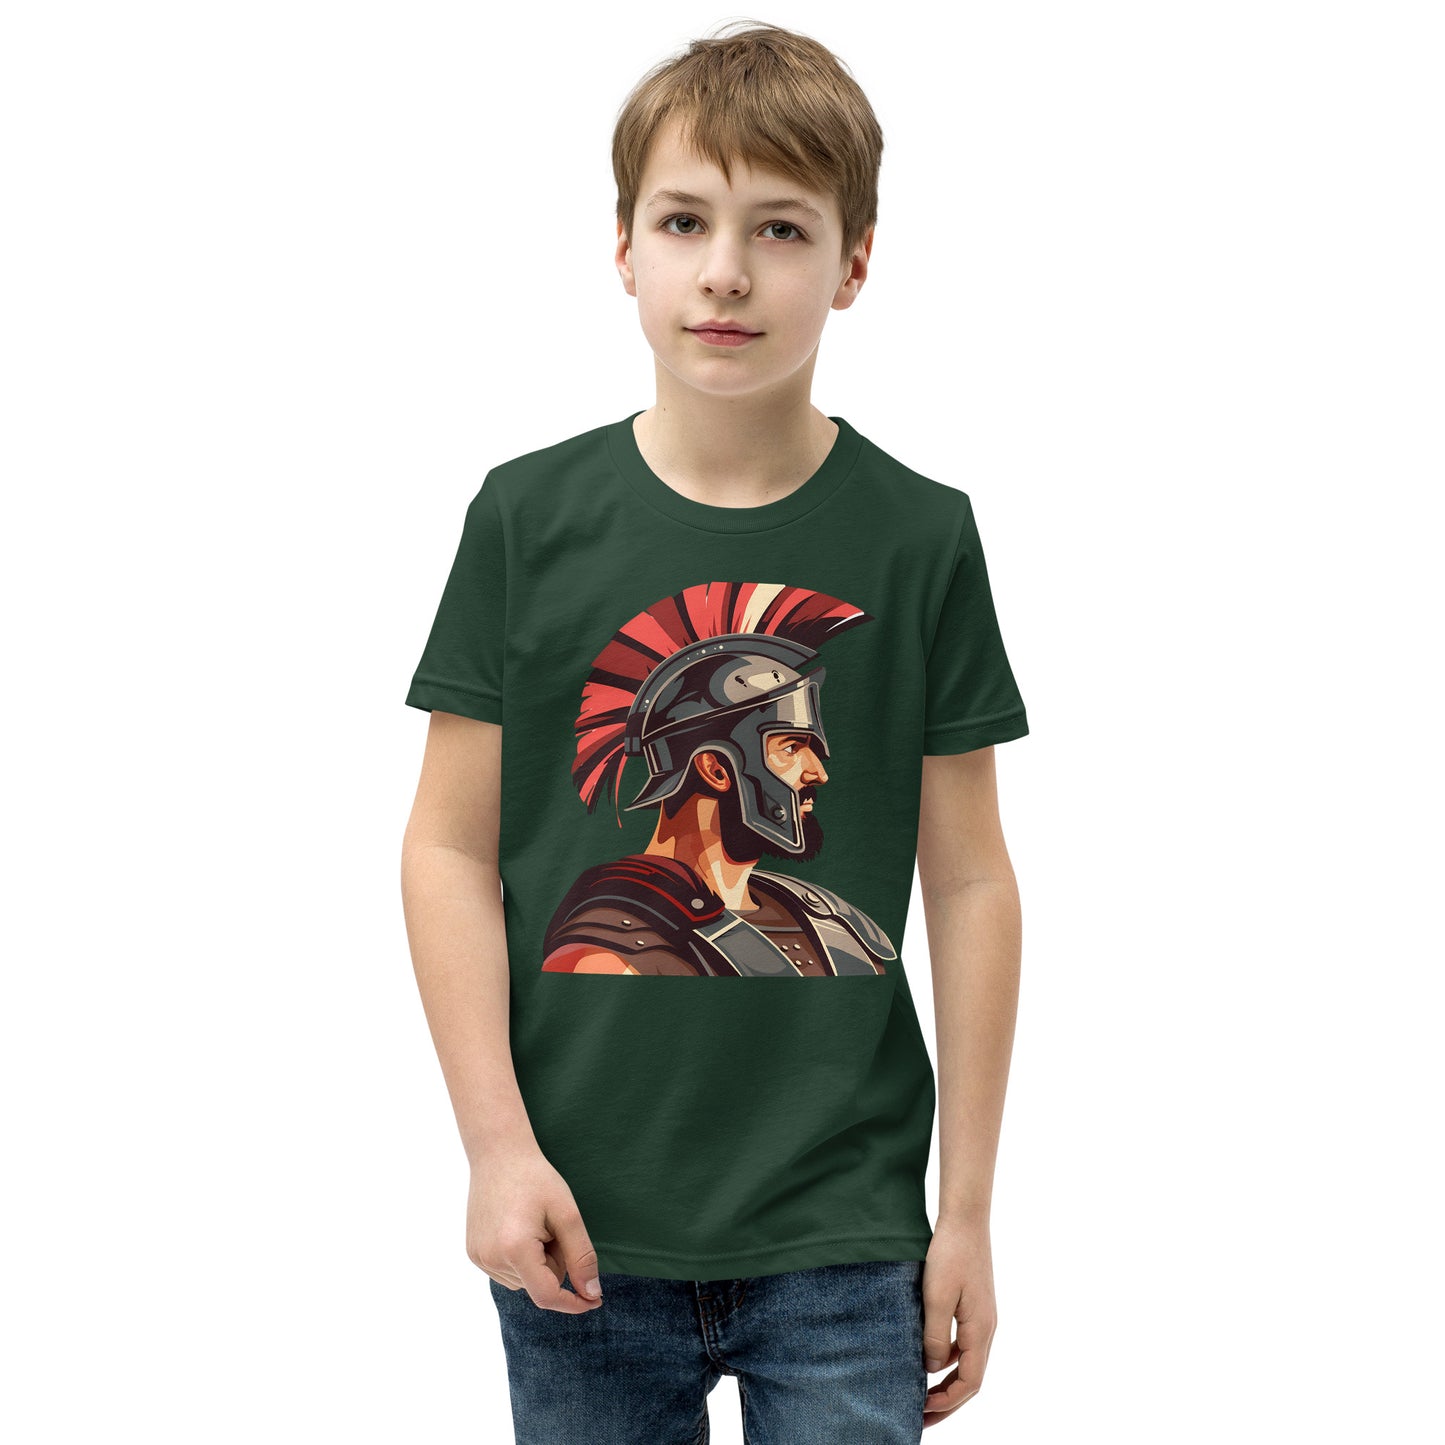 Teenager with a Forest T-shirt with a print of a warrior